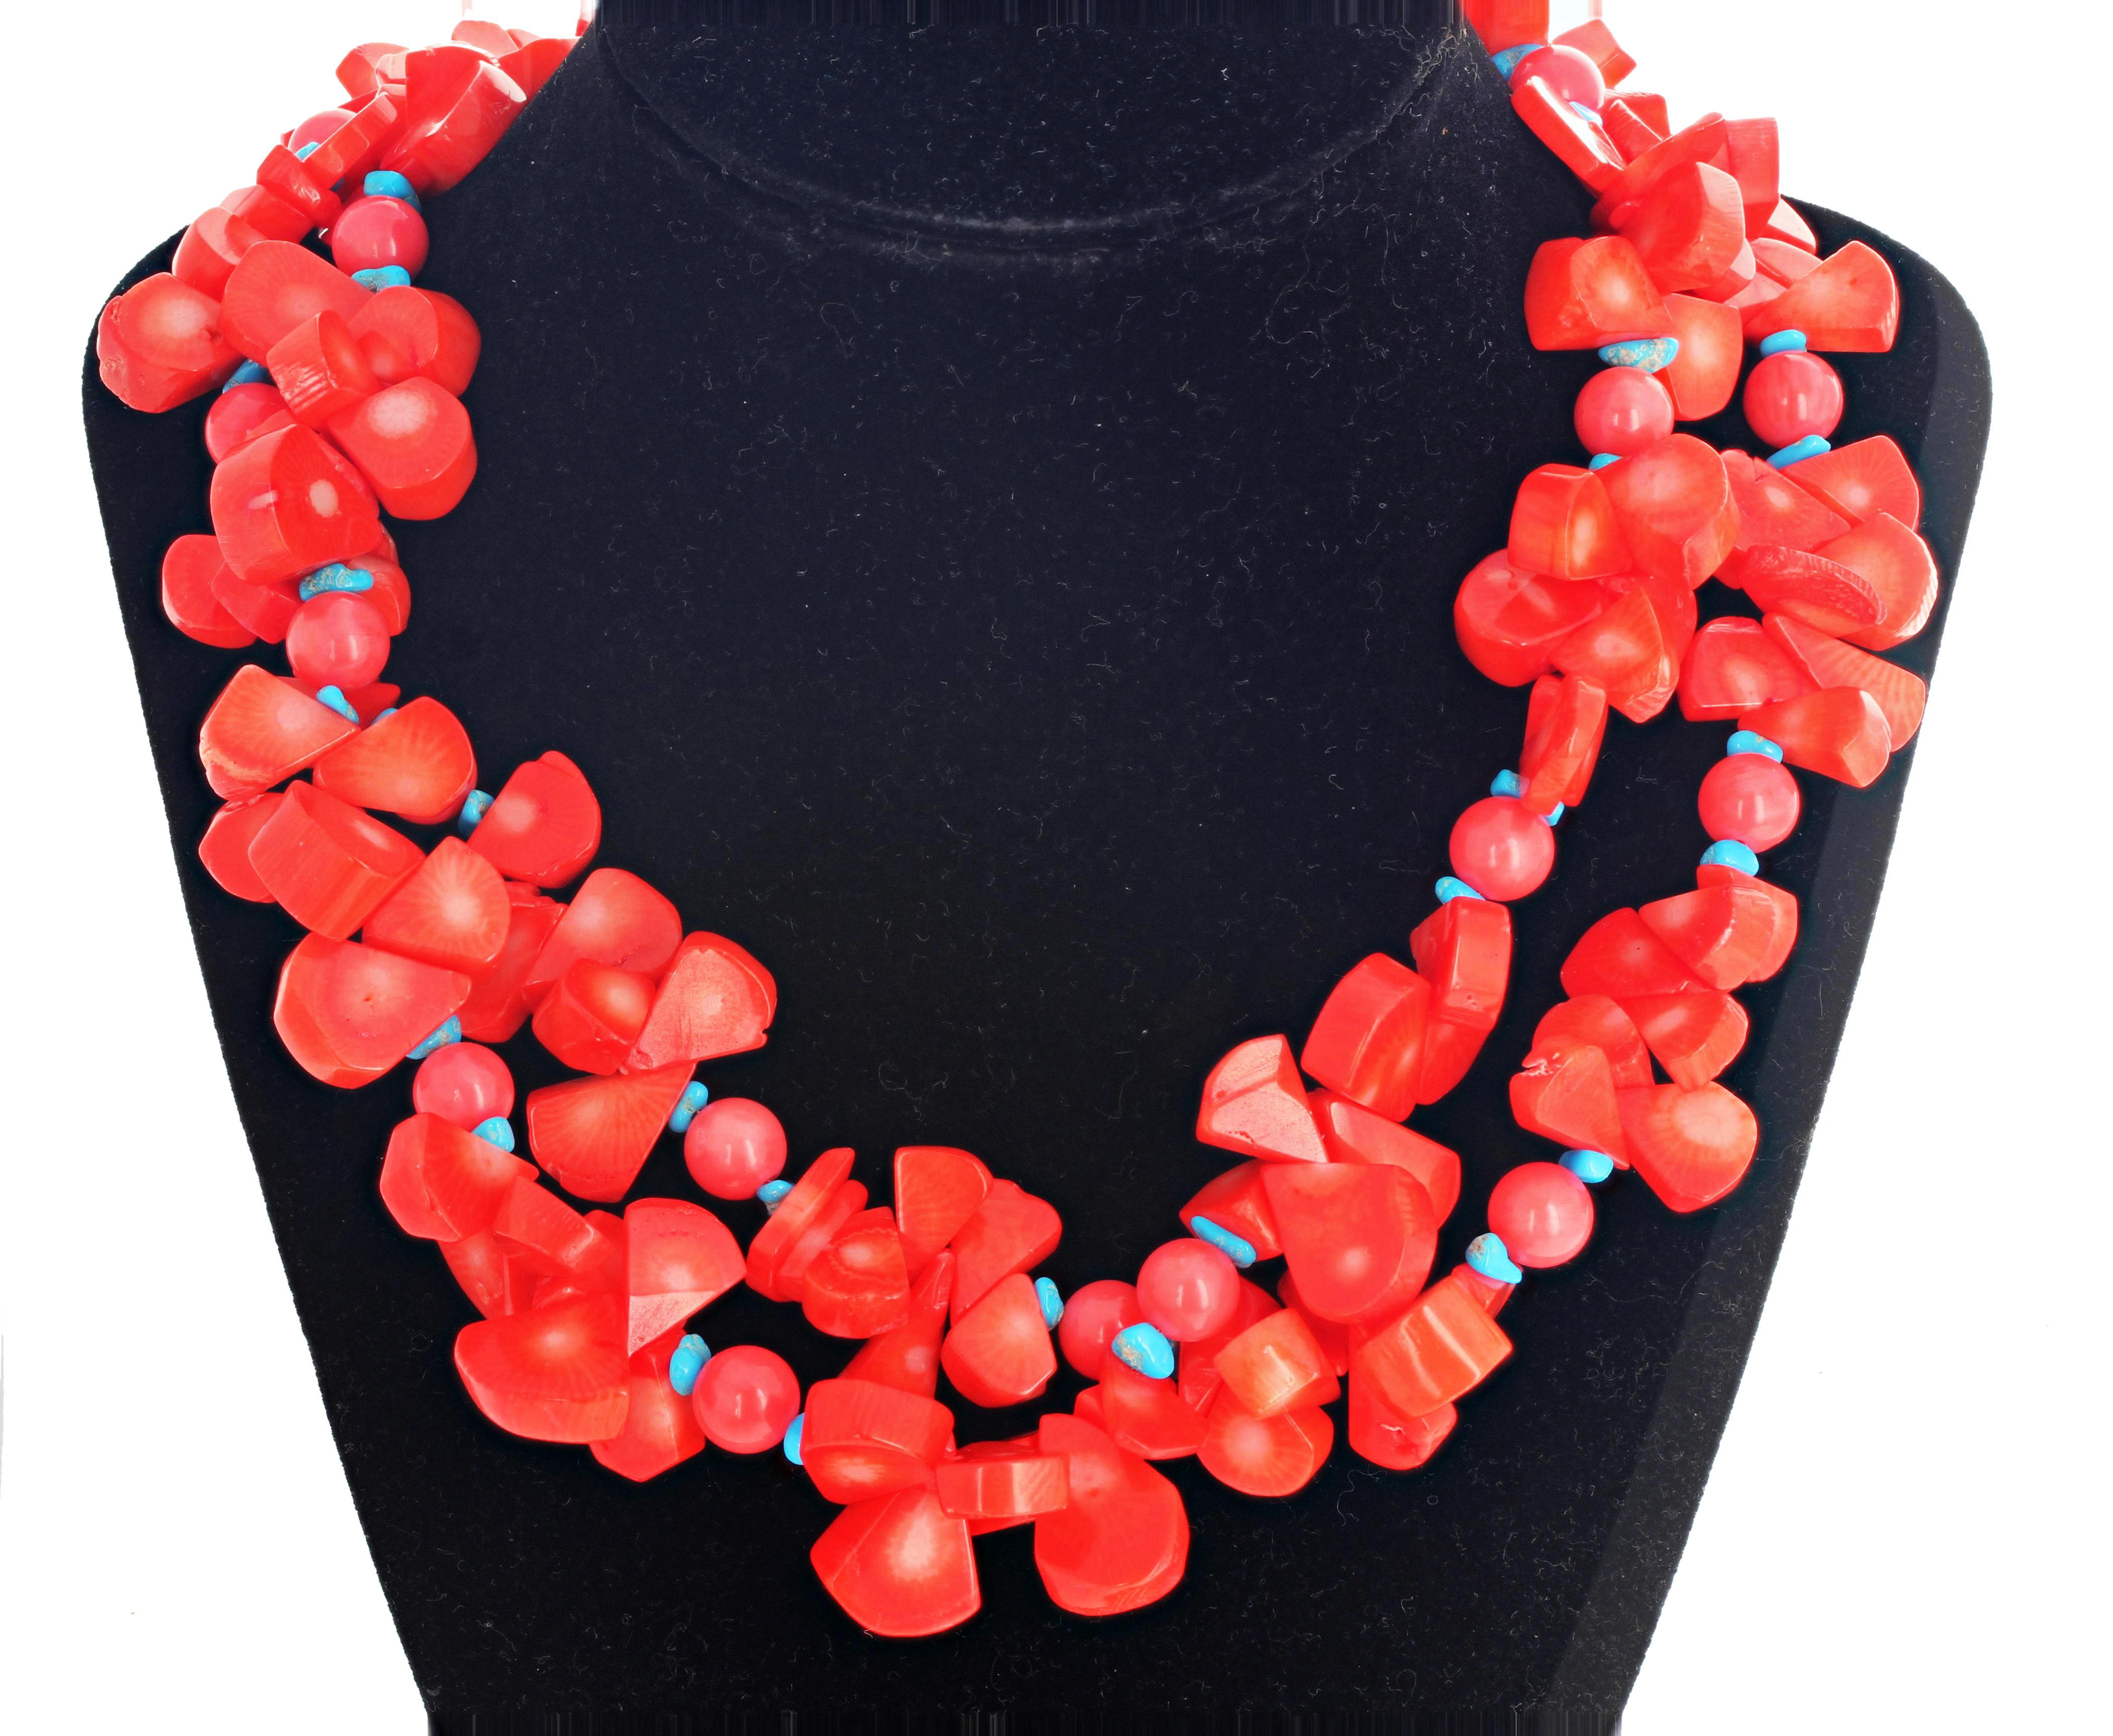 Unique double strand of unique polished petals and polished round natural Orange Coral accented with blue Turquoise rondels in this 18 inch long necklace with easy to use goldy tone hook clasp.  The largest Turquoise petals are approximately 16 mm x